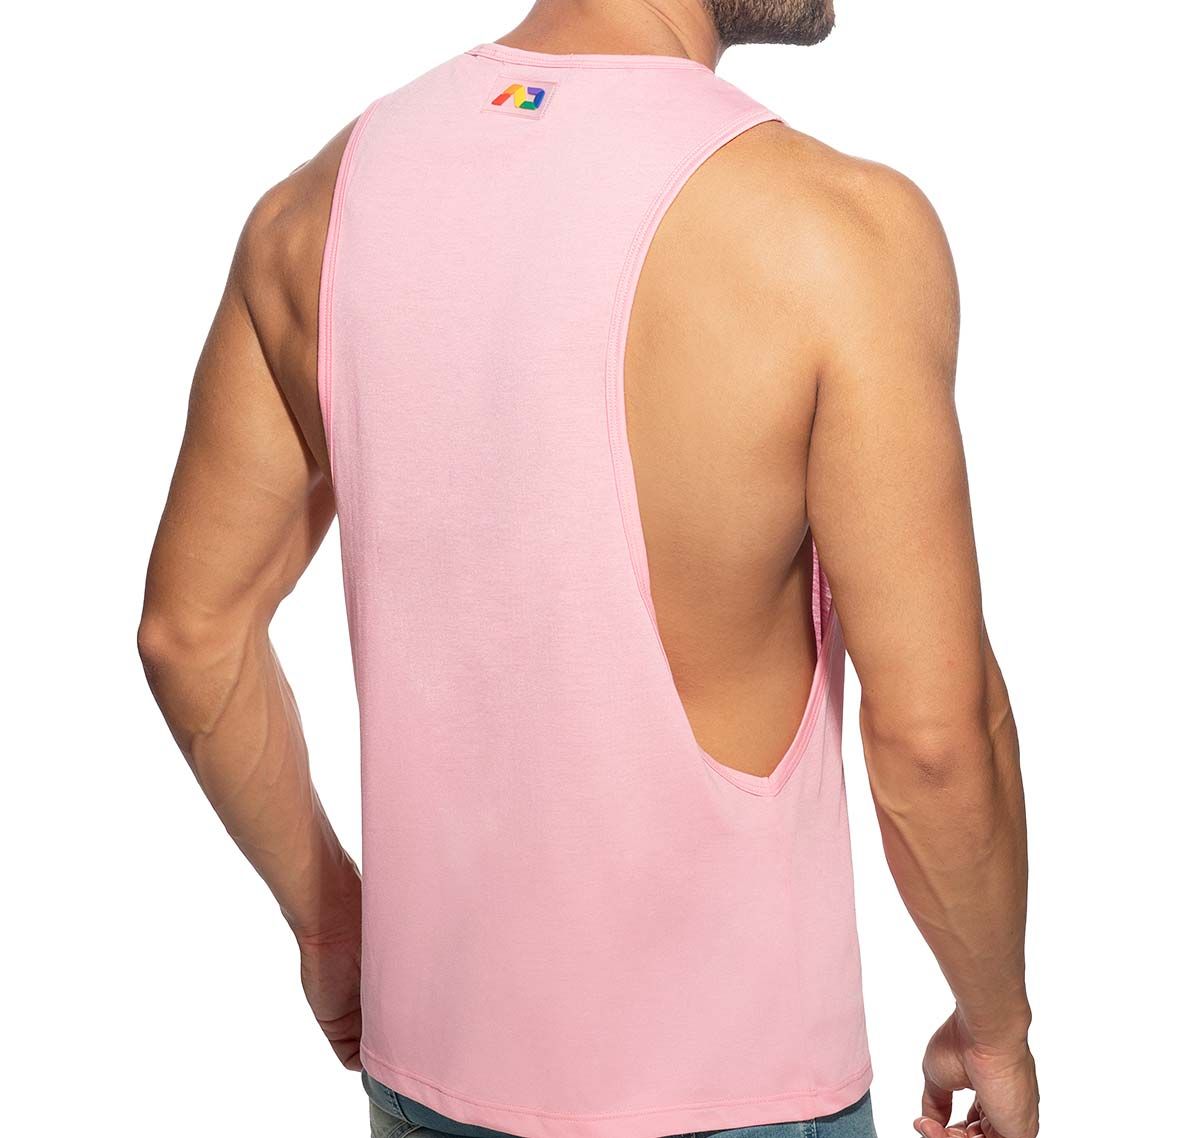 Addicted Tank Top MAD PRIDE LOW RIDER PU454, pink